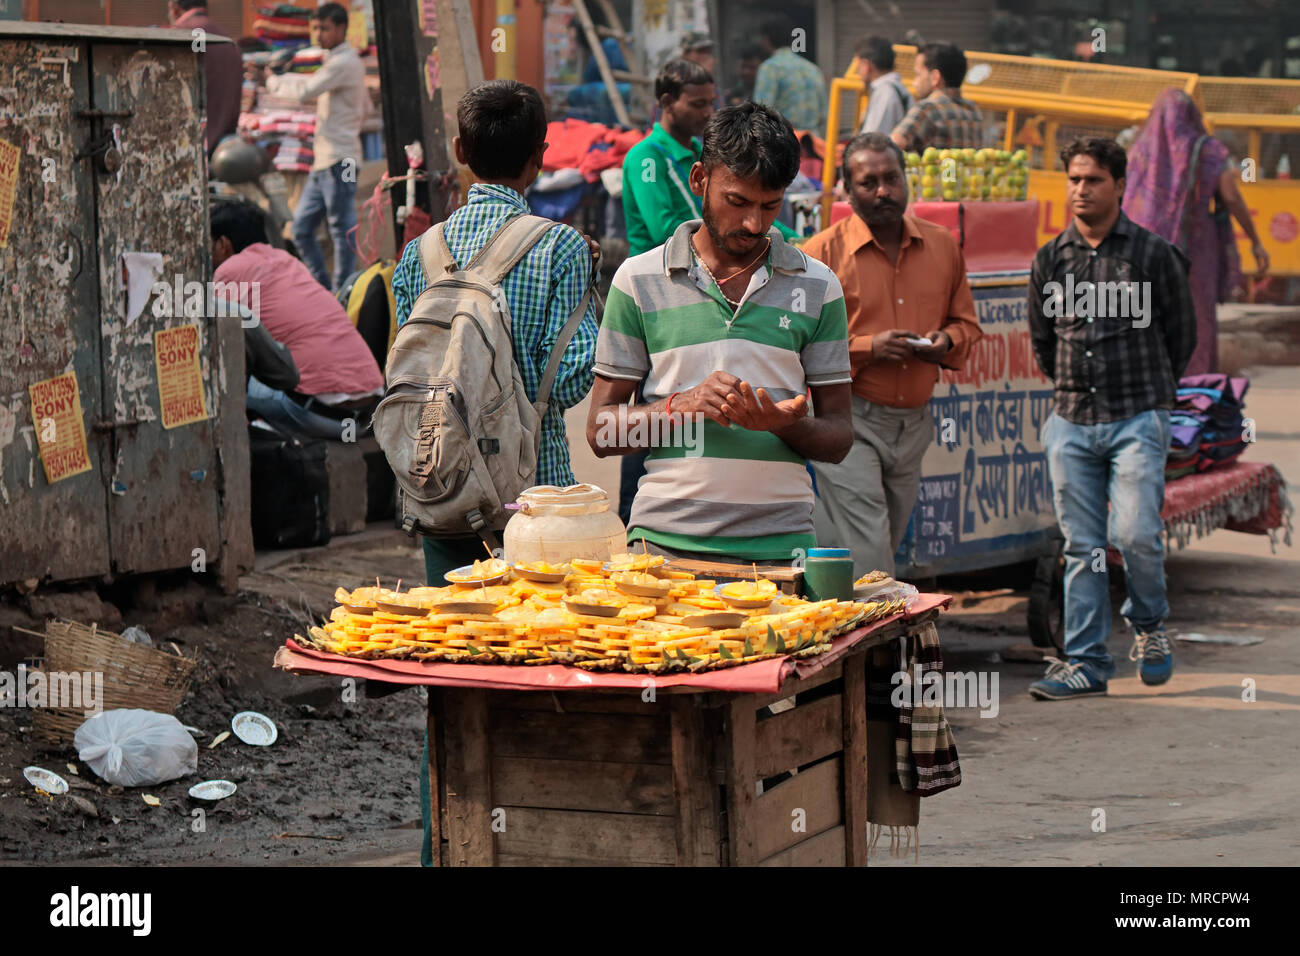 Delhi, India - November 20, 2015: An Indian man selling his fresh produce on a crowded street market of Old Delhi Stock Photo